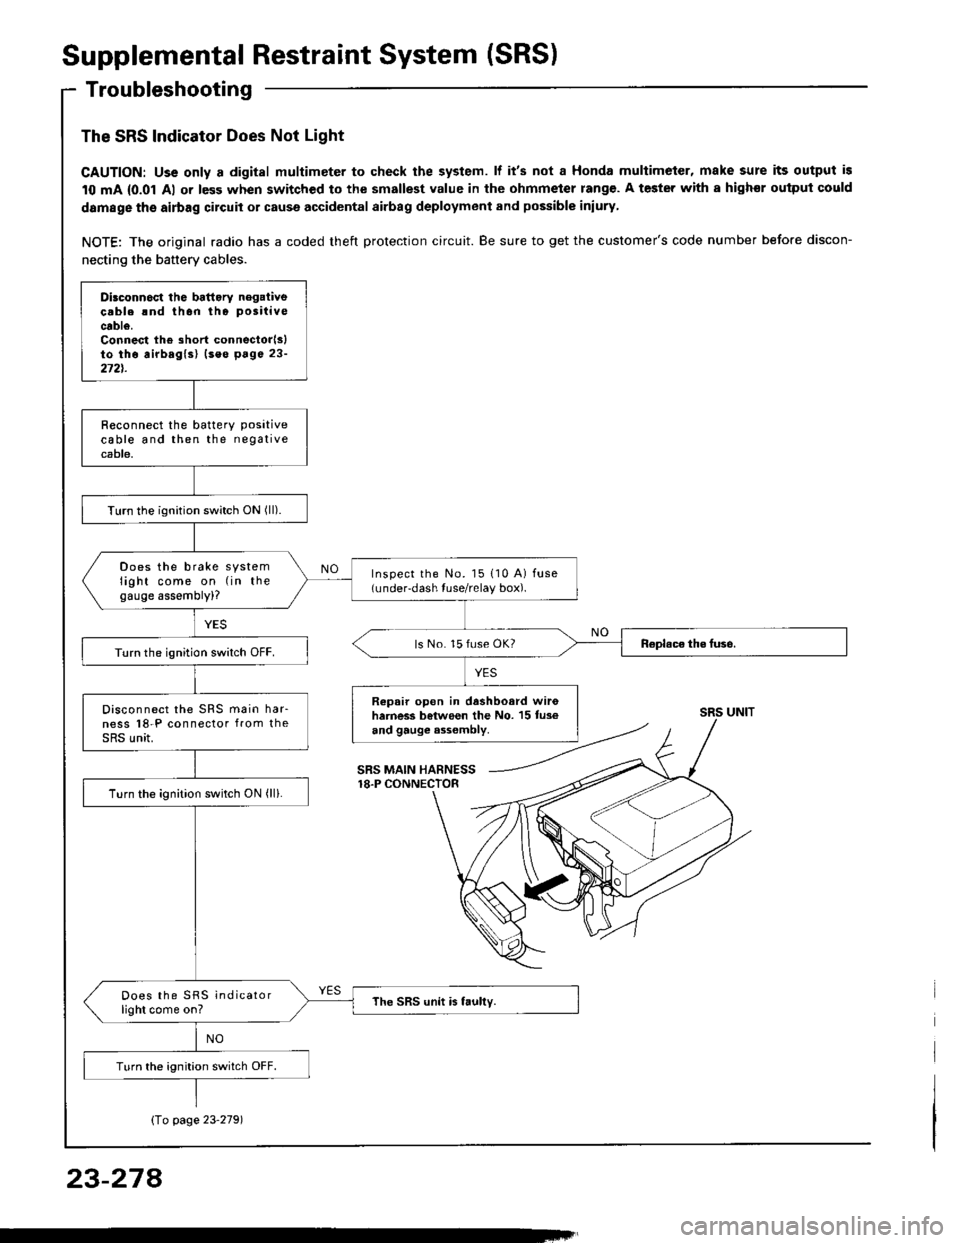 HONDA INTEGRA 1994 4.G Service Manual Supplemental Restraint System (SRS)
Troubleshooting
The SRS Indicator Does Not Light
CAUTION: Uss only a digital multimeter to check the system. lf its not a Honda multimeter, make sure its output is